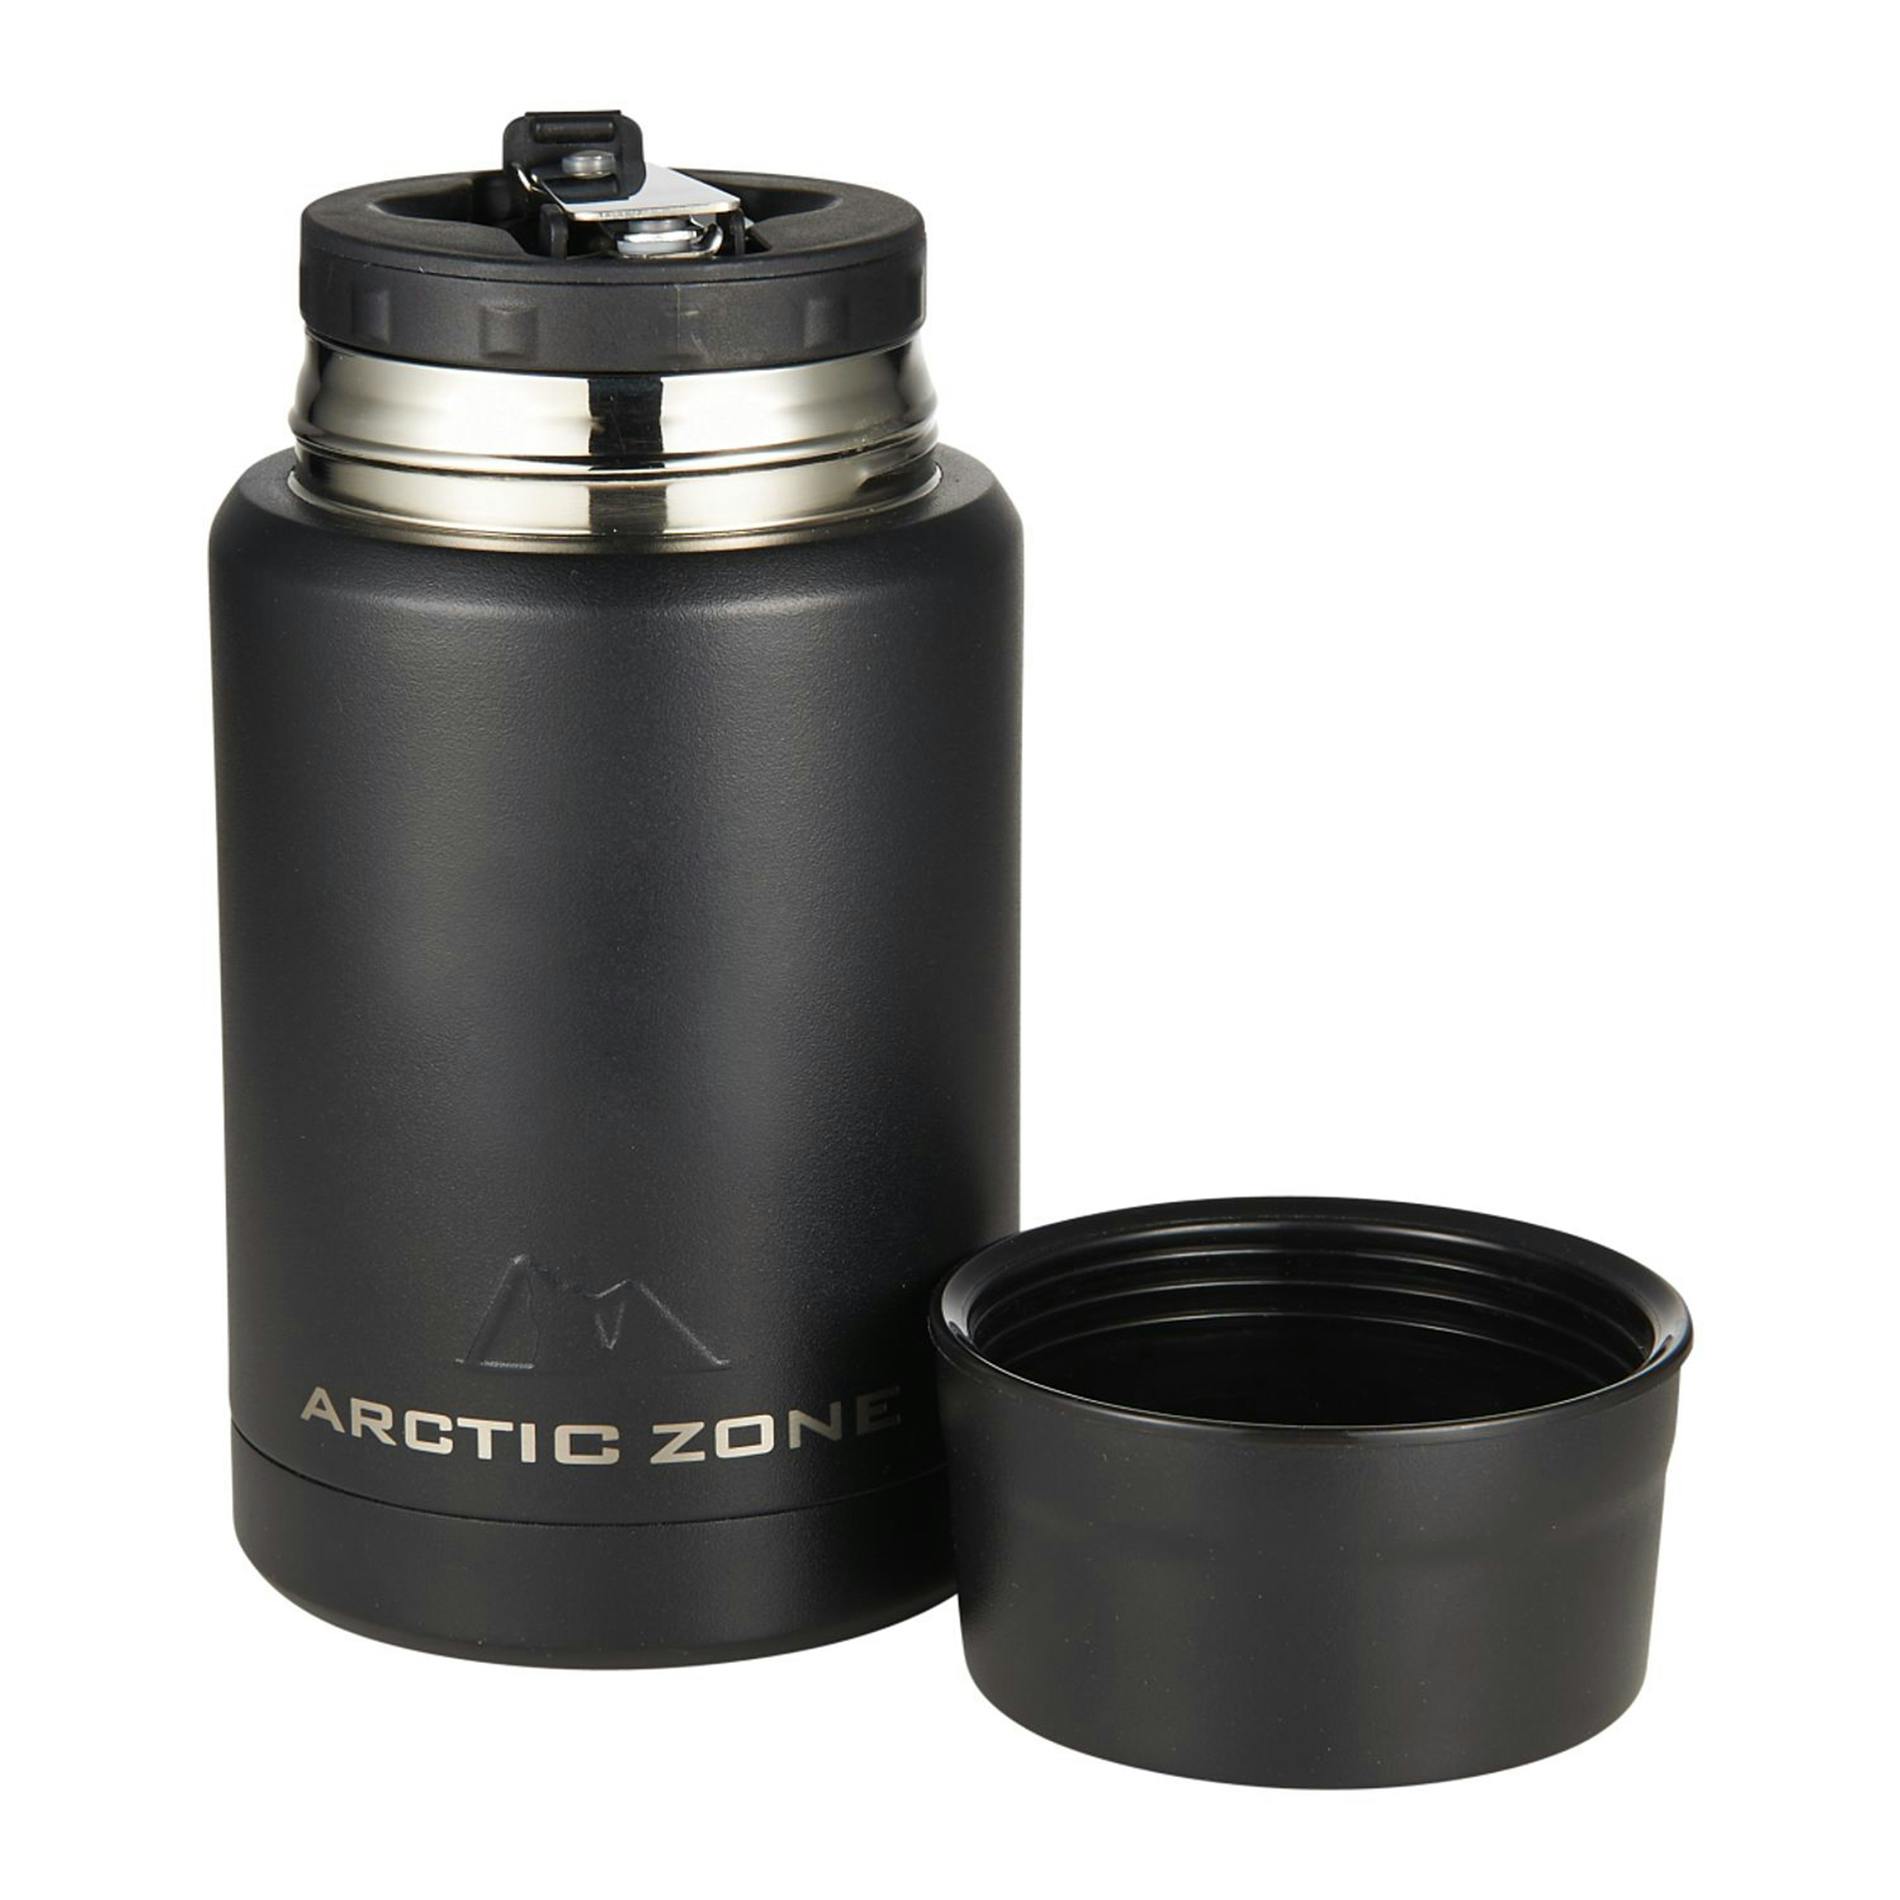 Arctic Zone® Titan Copper Insulated Food Storage - additional Image 6